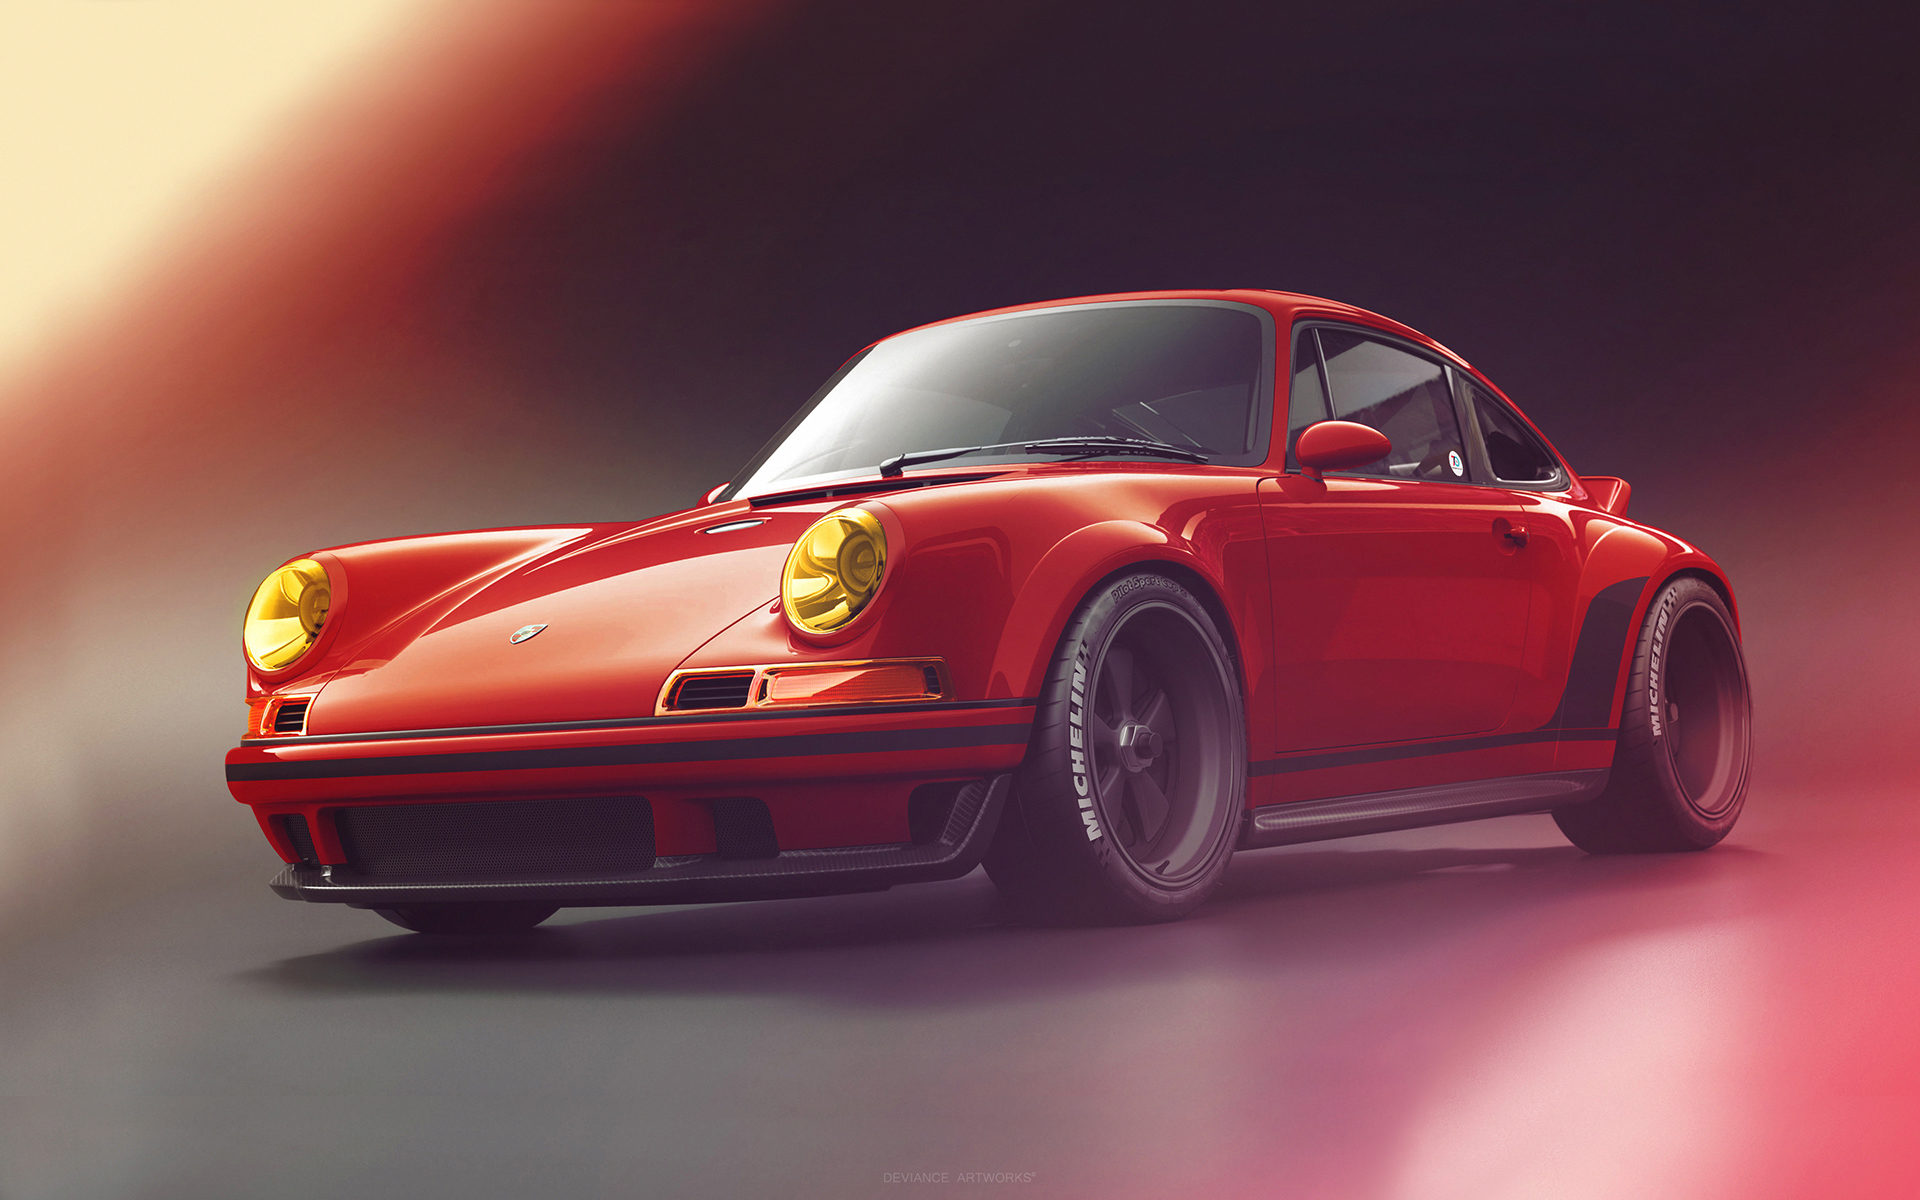 Daily Wallpaper: Singer Porsche. I Like To Waste My Time